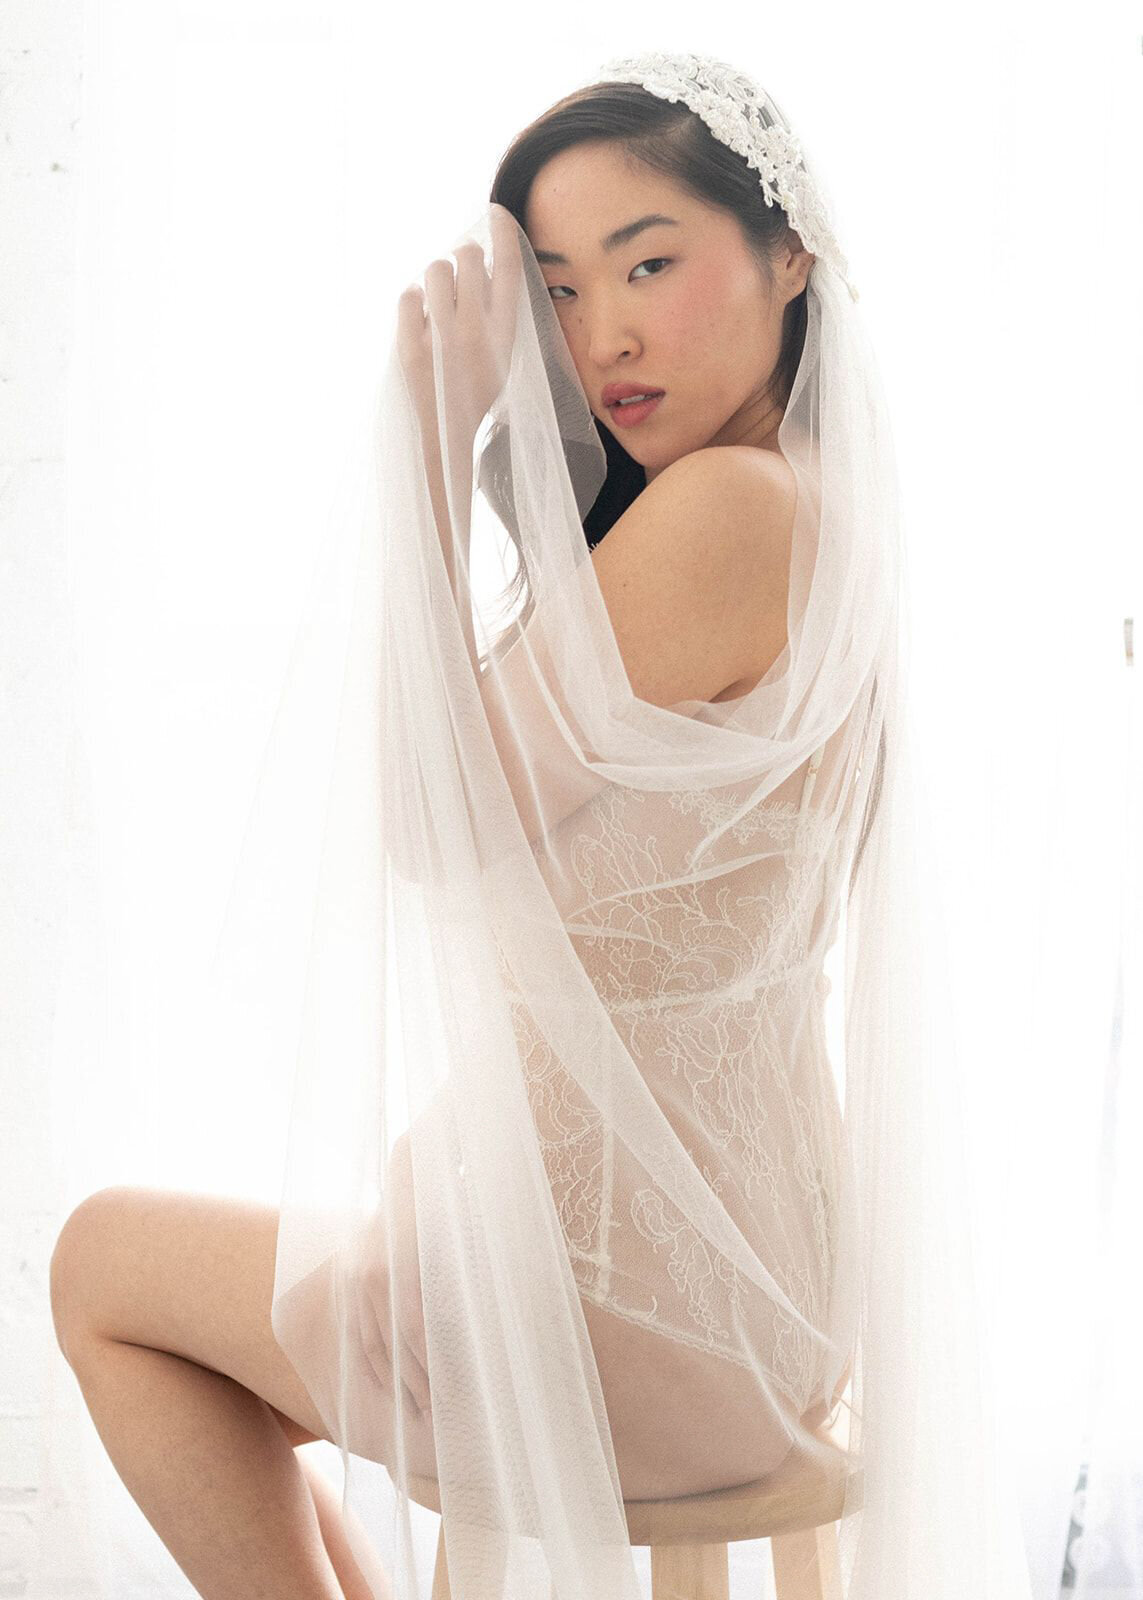 Stunning lace Juliet veil by Blair Nadeau Bridal Adornments, romantic and modern wedding jewelry based in Brampton. Featured on the Brontë Bride Vendor Guide.